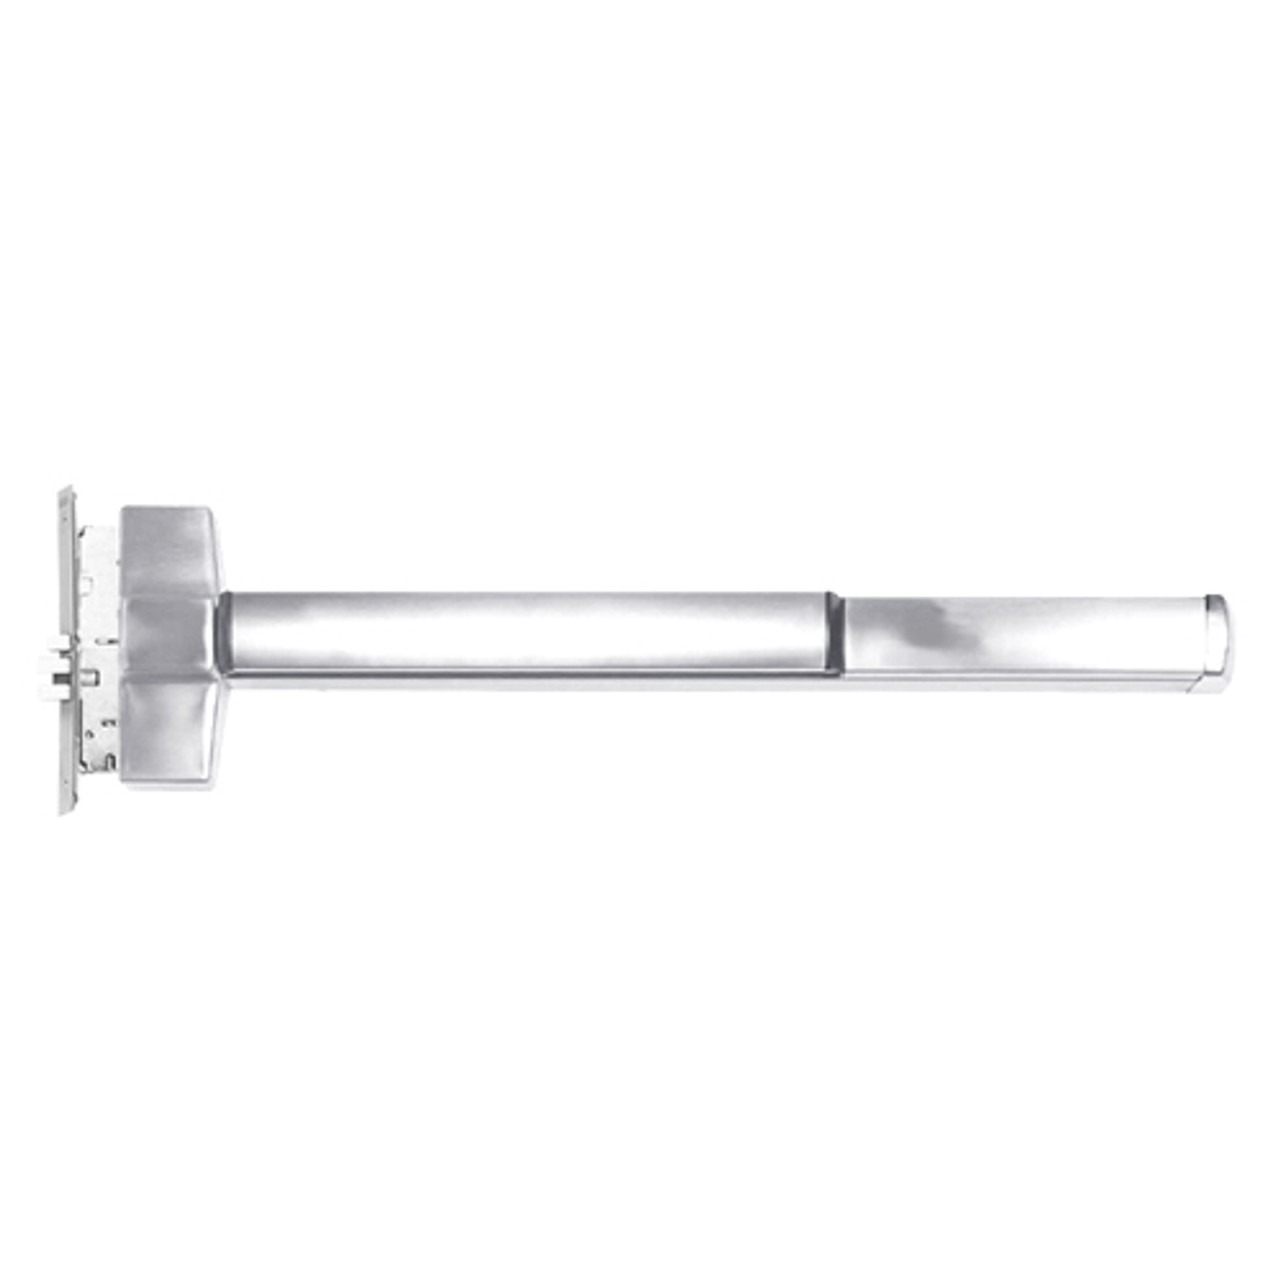 ED5657AL-625-LHR Corbin ED5600 Series Fire Rated Mortise Exit Device in Bright Chrome Finish